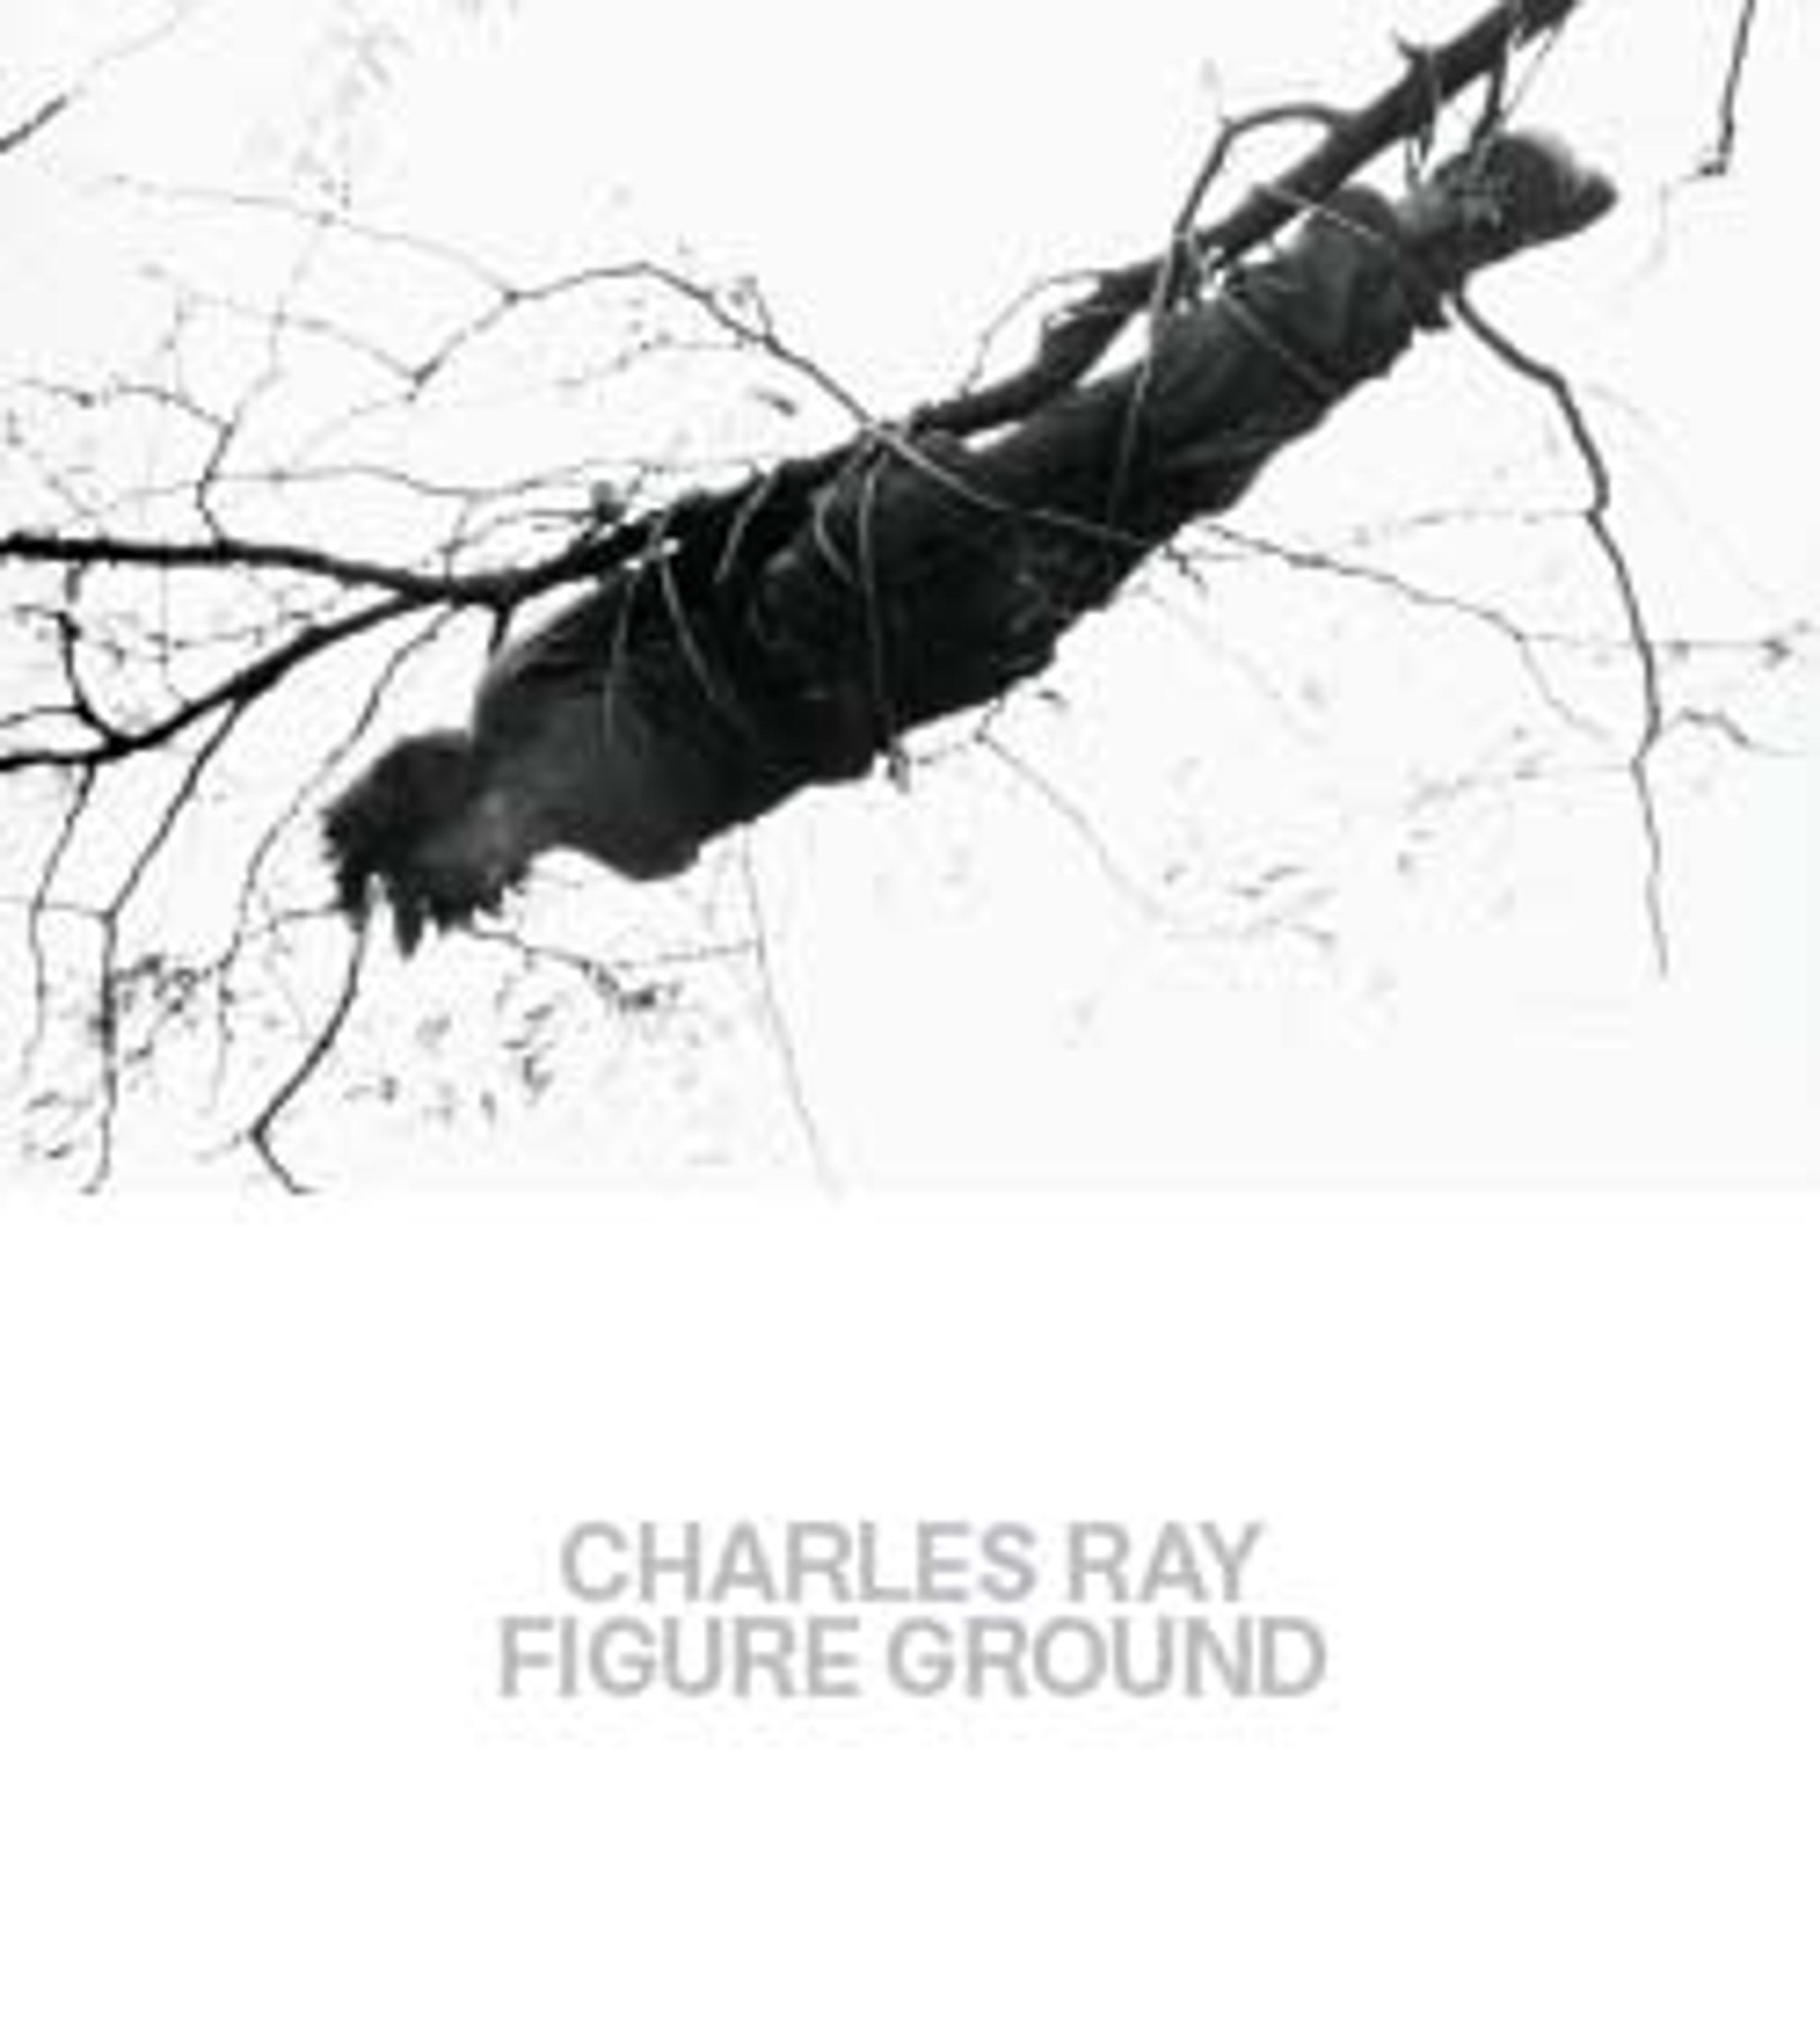 the cover of the book "Charles Ray: Figure Ground," with a photograph of a man facing downwards bound to the underside of a tree branch